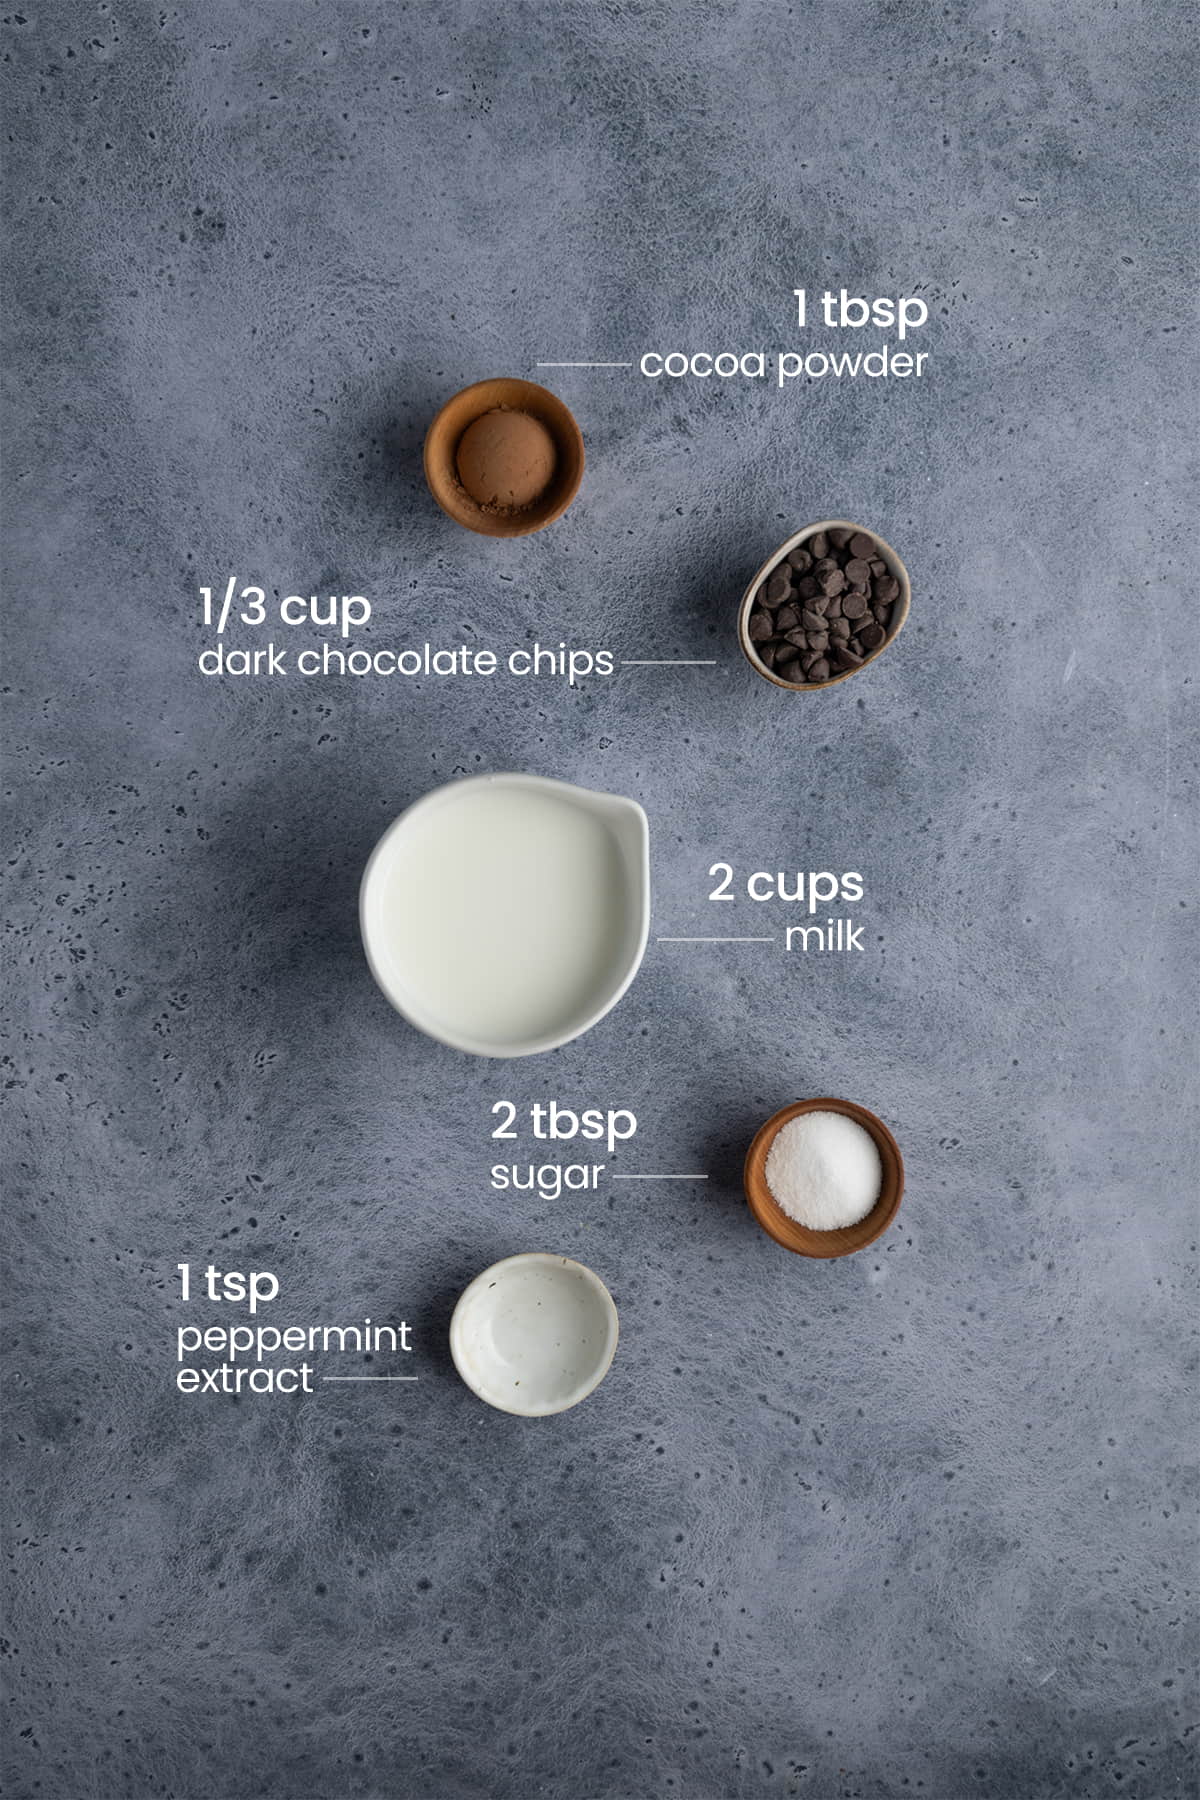 ingredients for peppermint hot chocolate - cocoa powder, dark chocolate chips, milk, sugar, peppermint extract